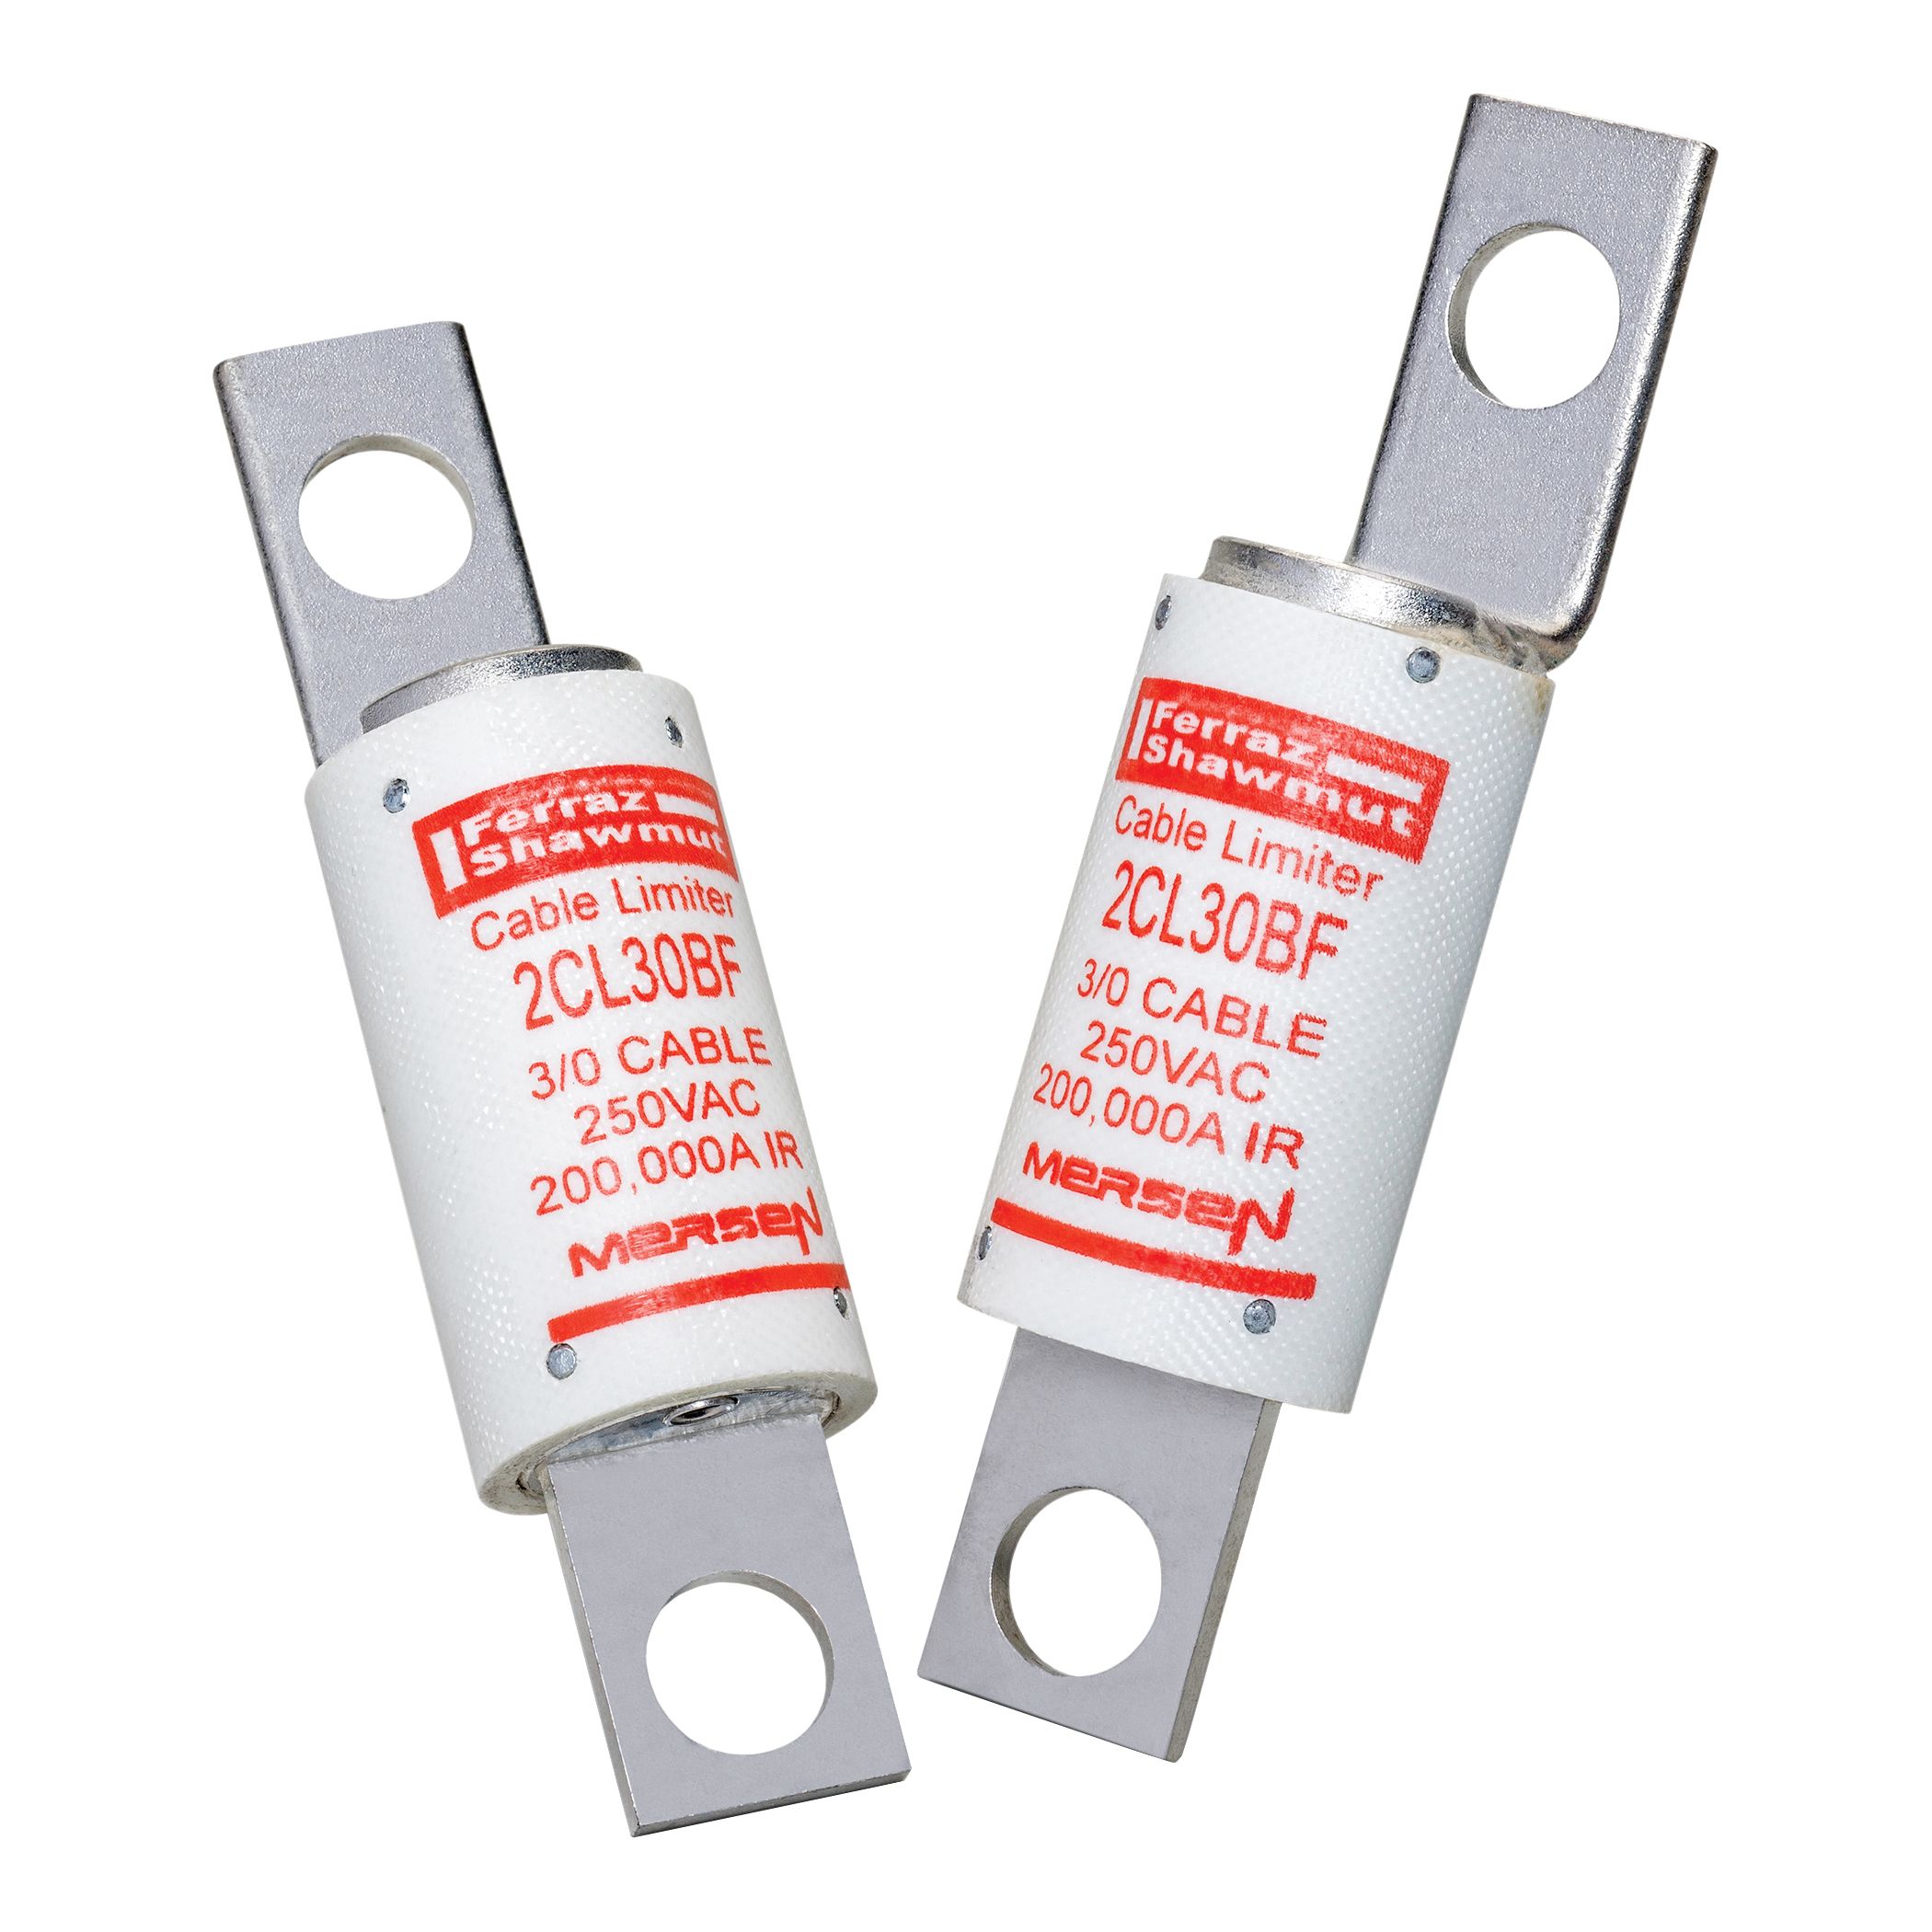 2CL2BF - Cable Protector Fuse 250V #2 Blade To Offset Bus Mount 2CL Series